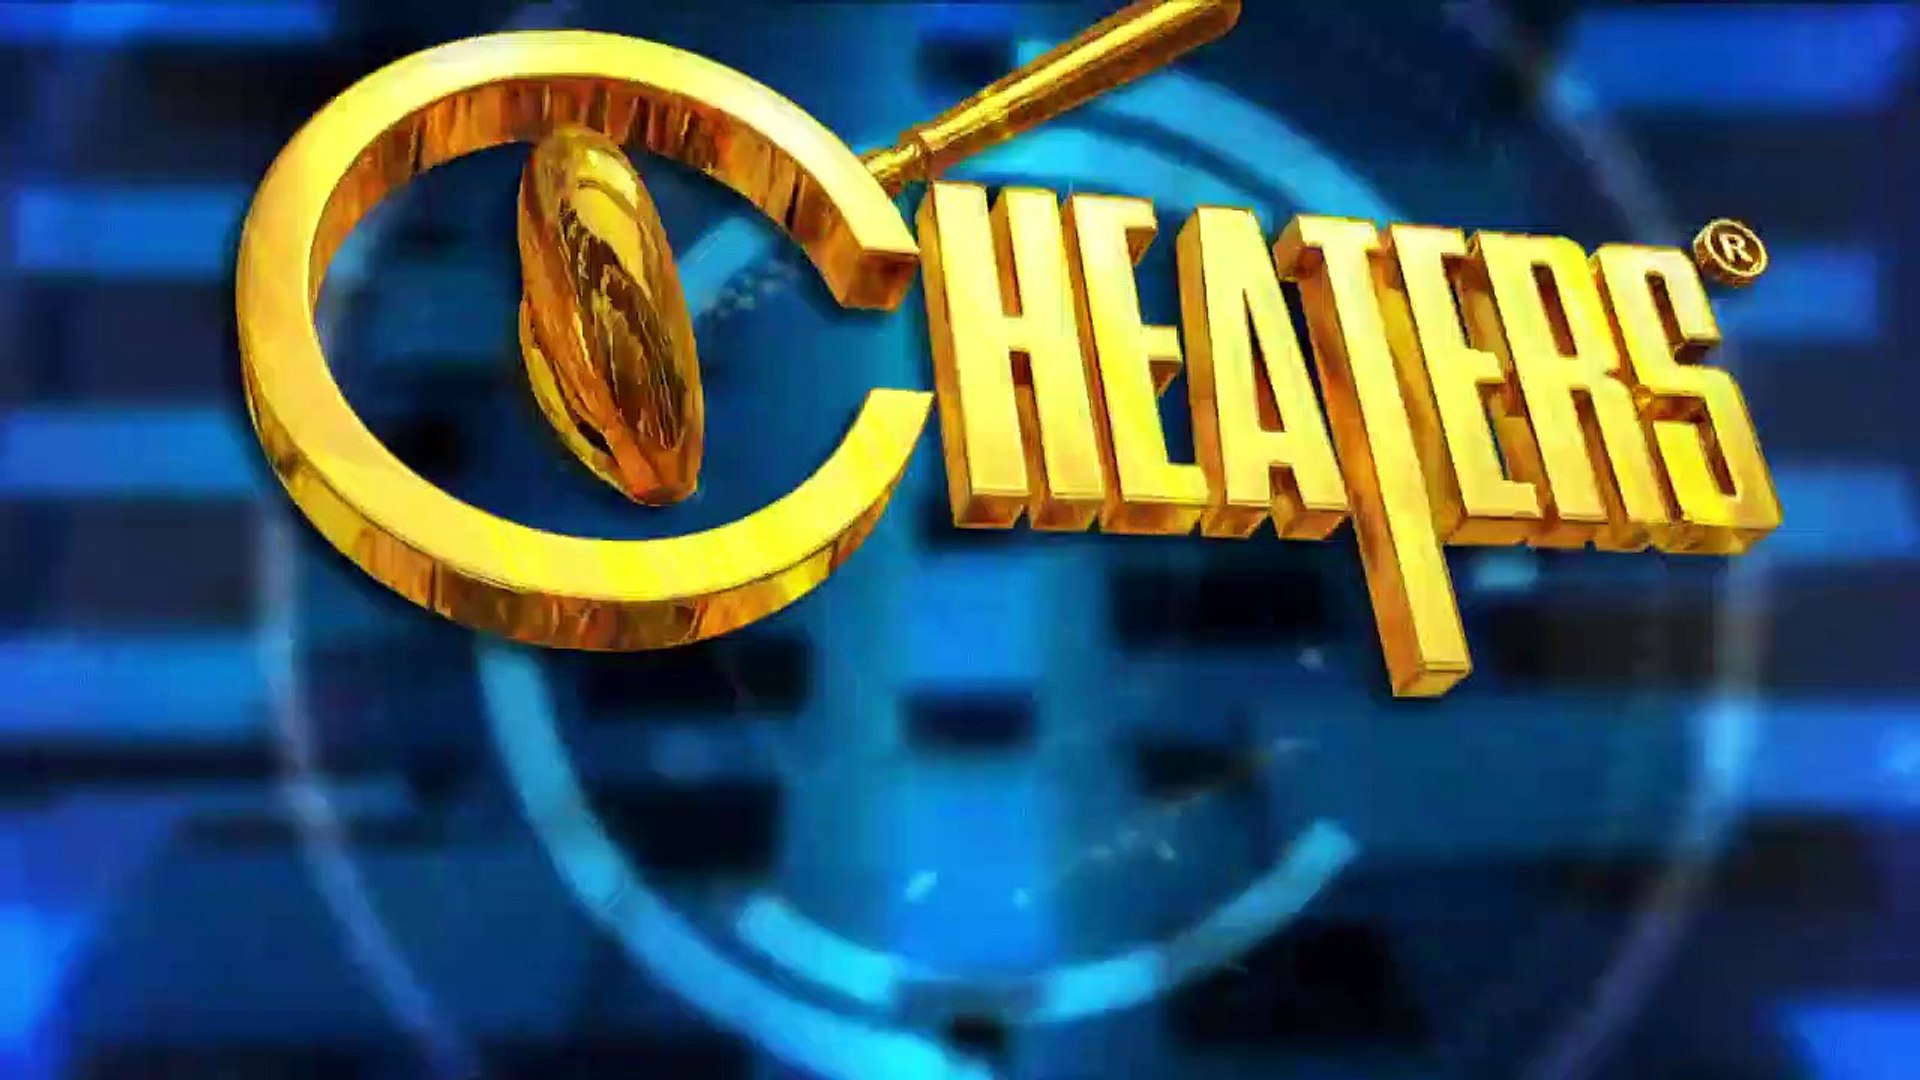 Cheaters S14E01 - video Dailymotion